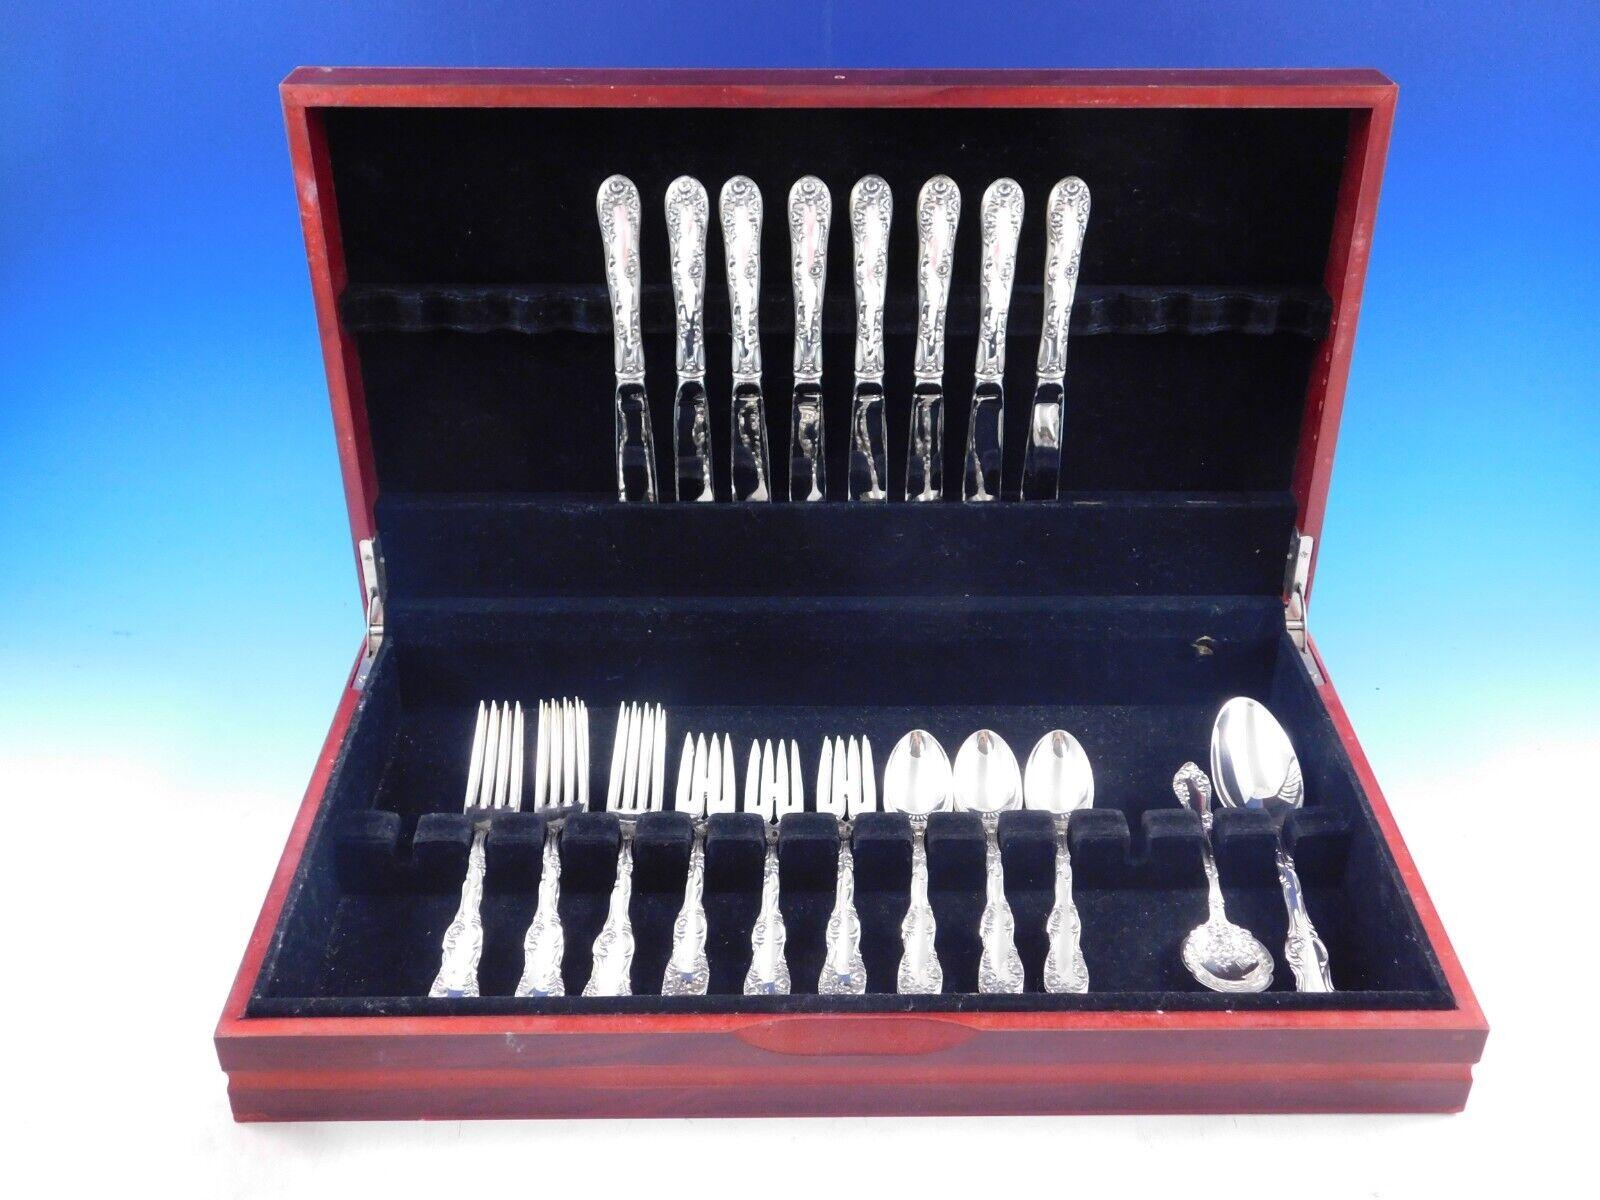 Old English by Towle sterling silver Flatware set, 34ieces. This set includes:

8 Regular Knives, 8 3/4